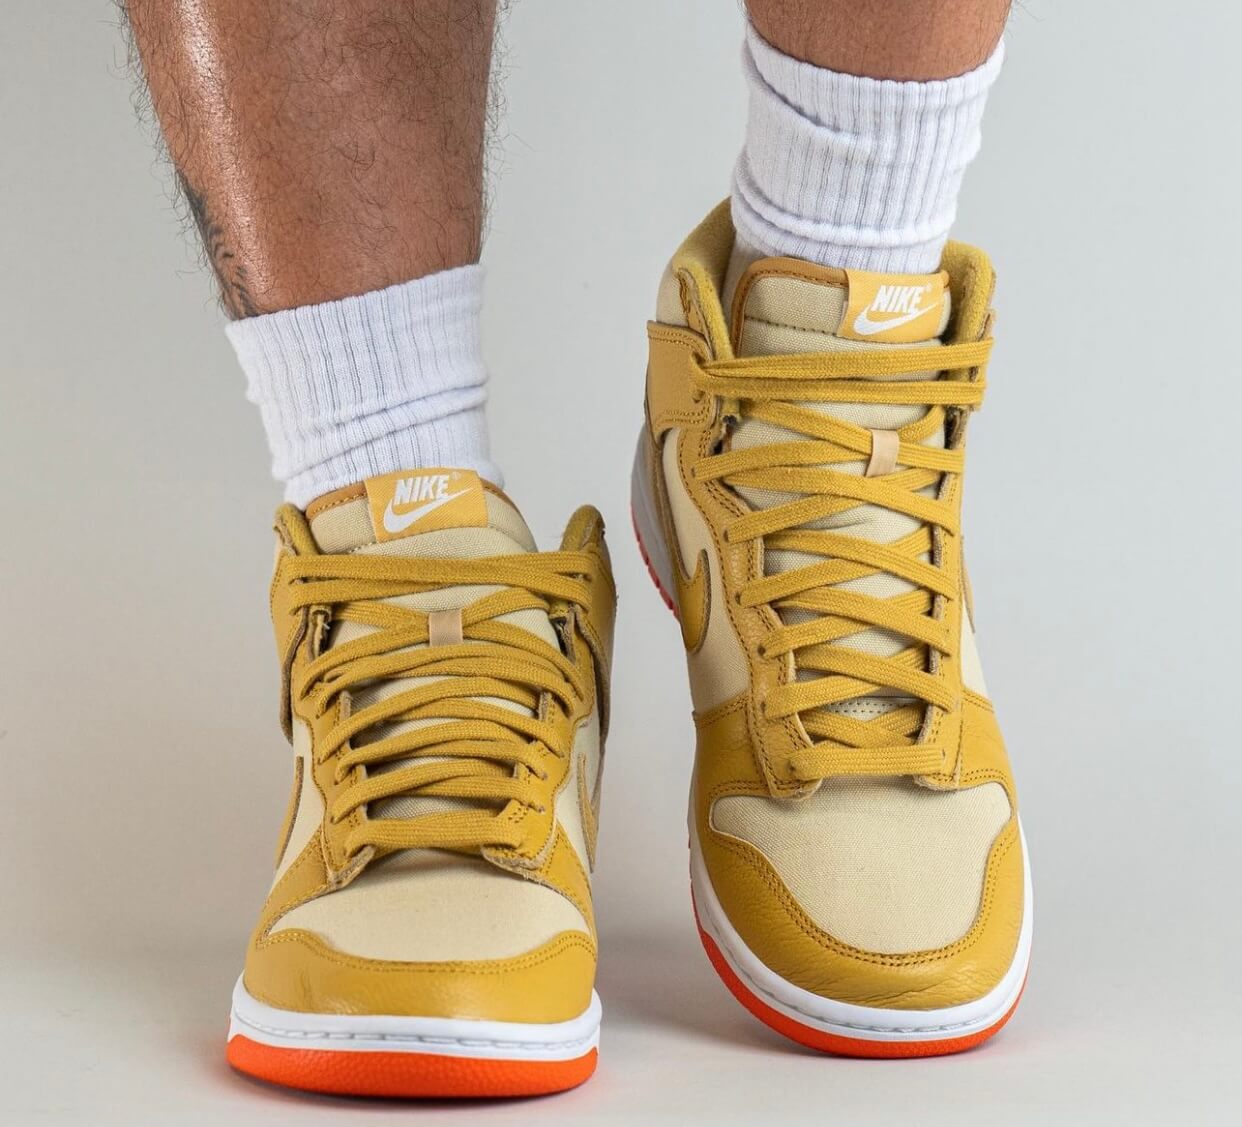 The Nike Dunk High "Gold Canvas"